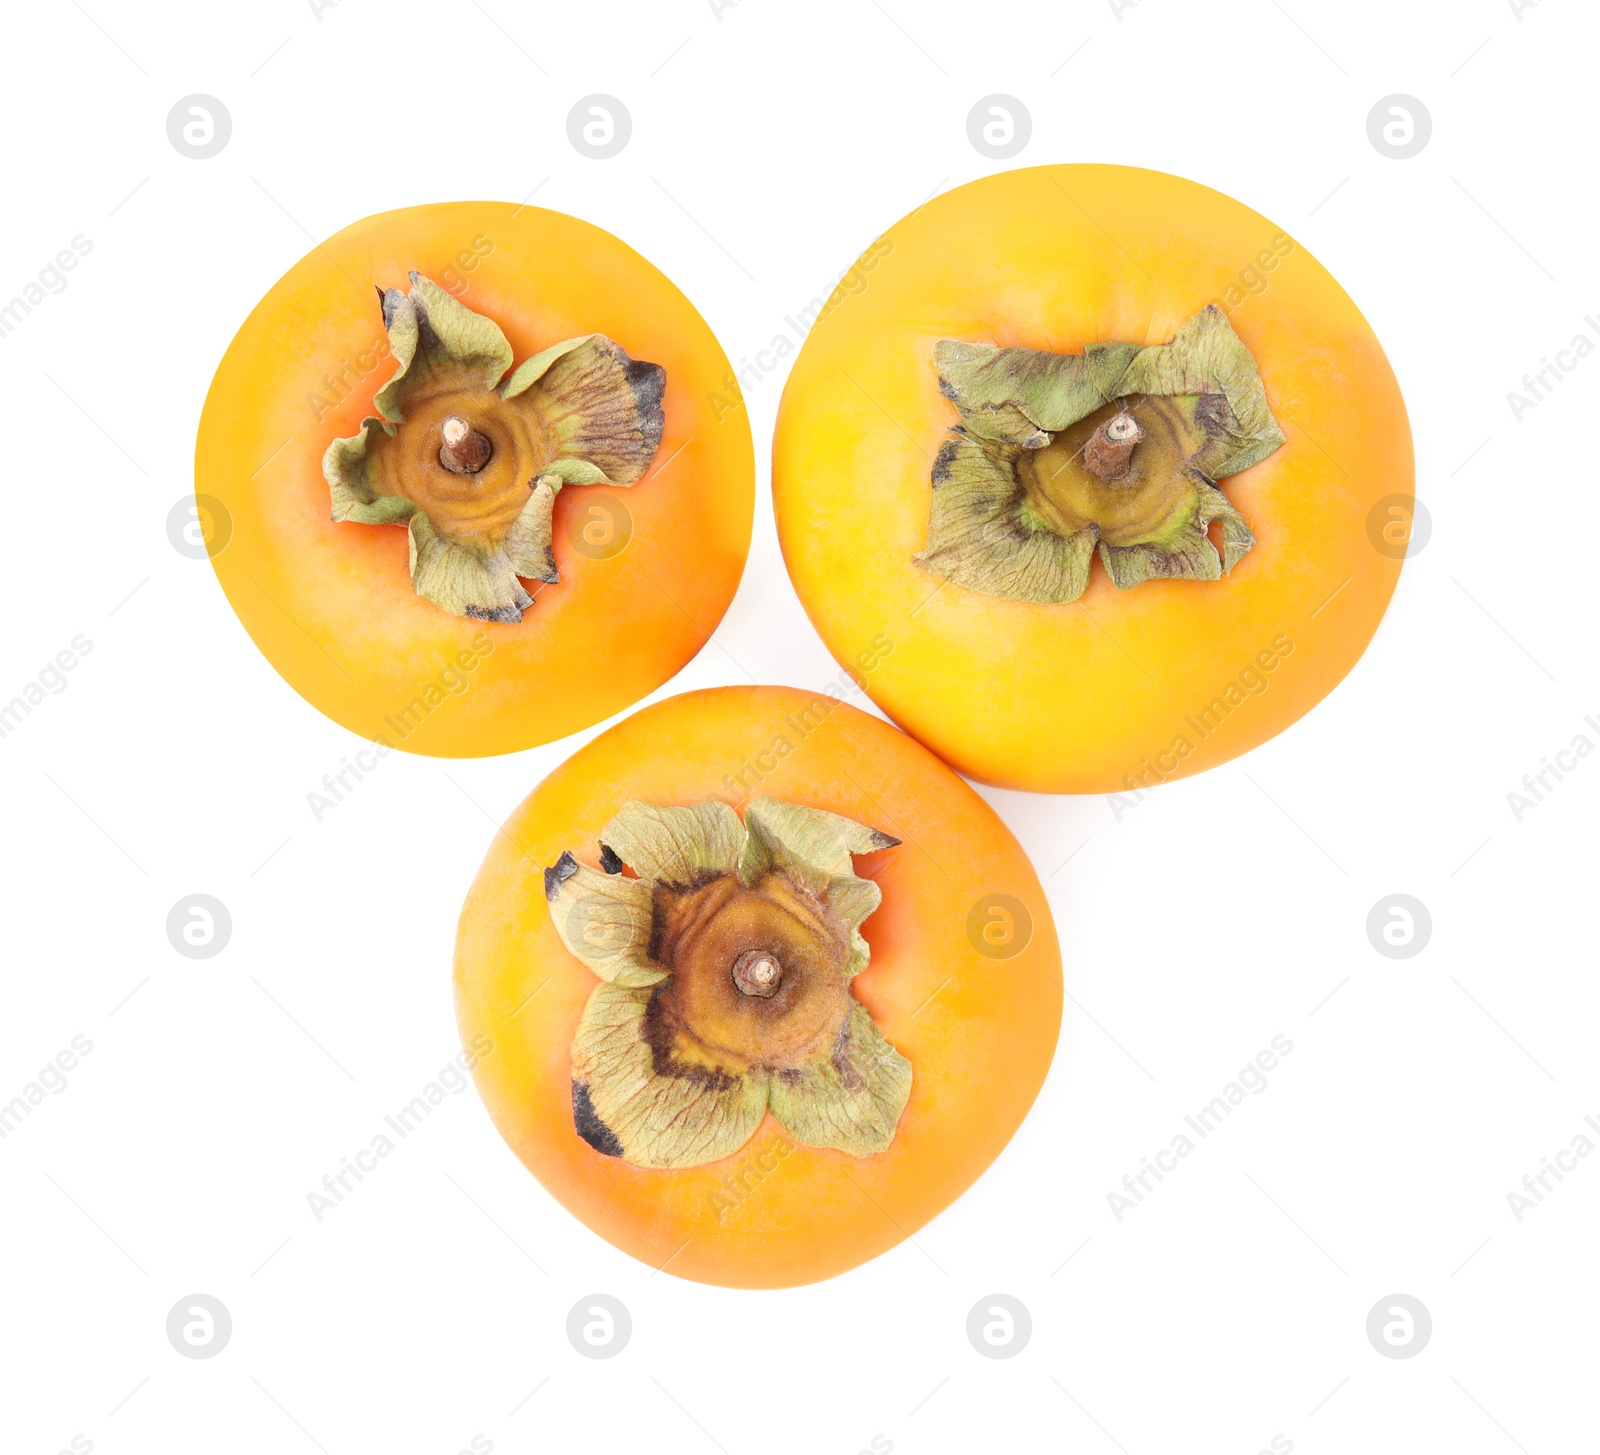 Photo of Whole delicious juicy persimmons on white background, top view